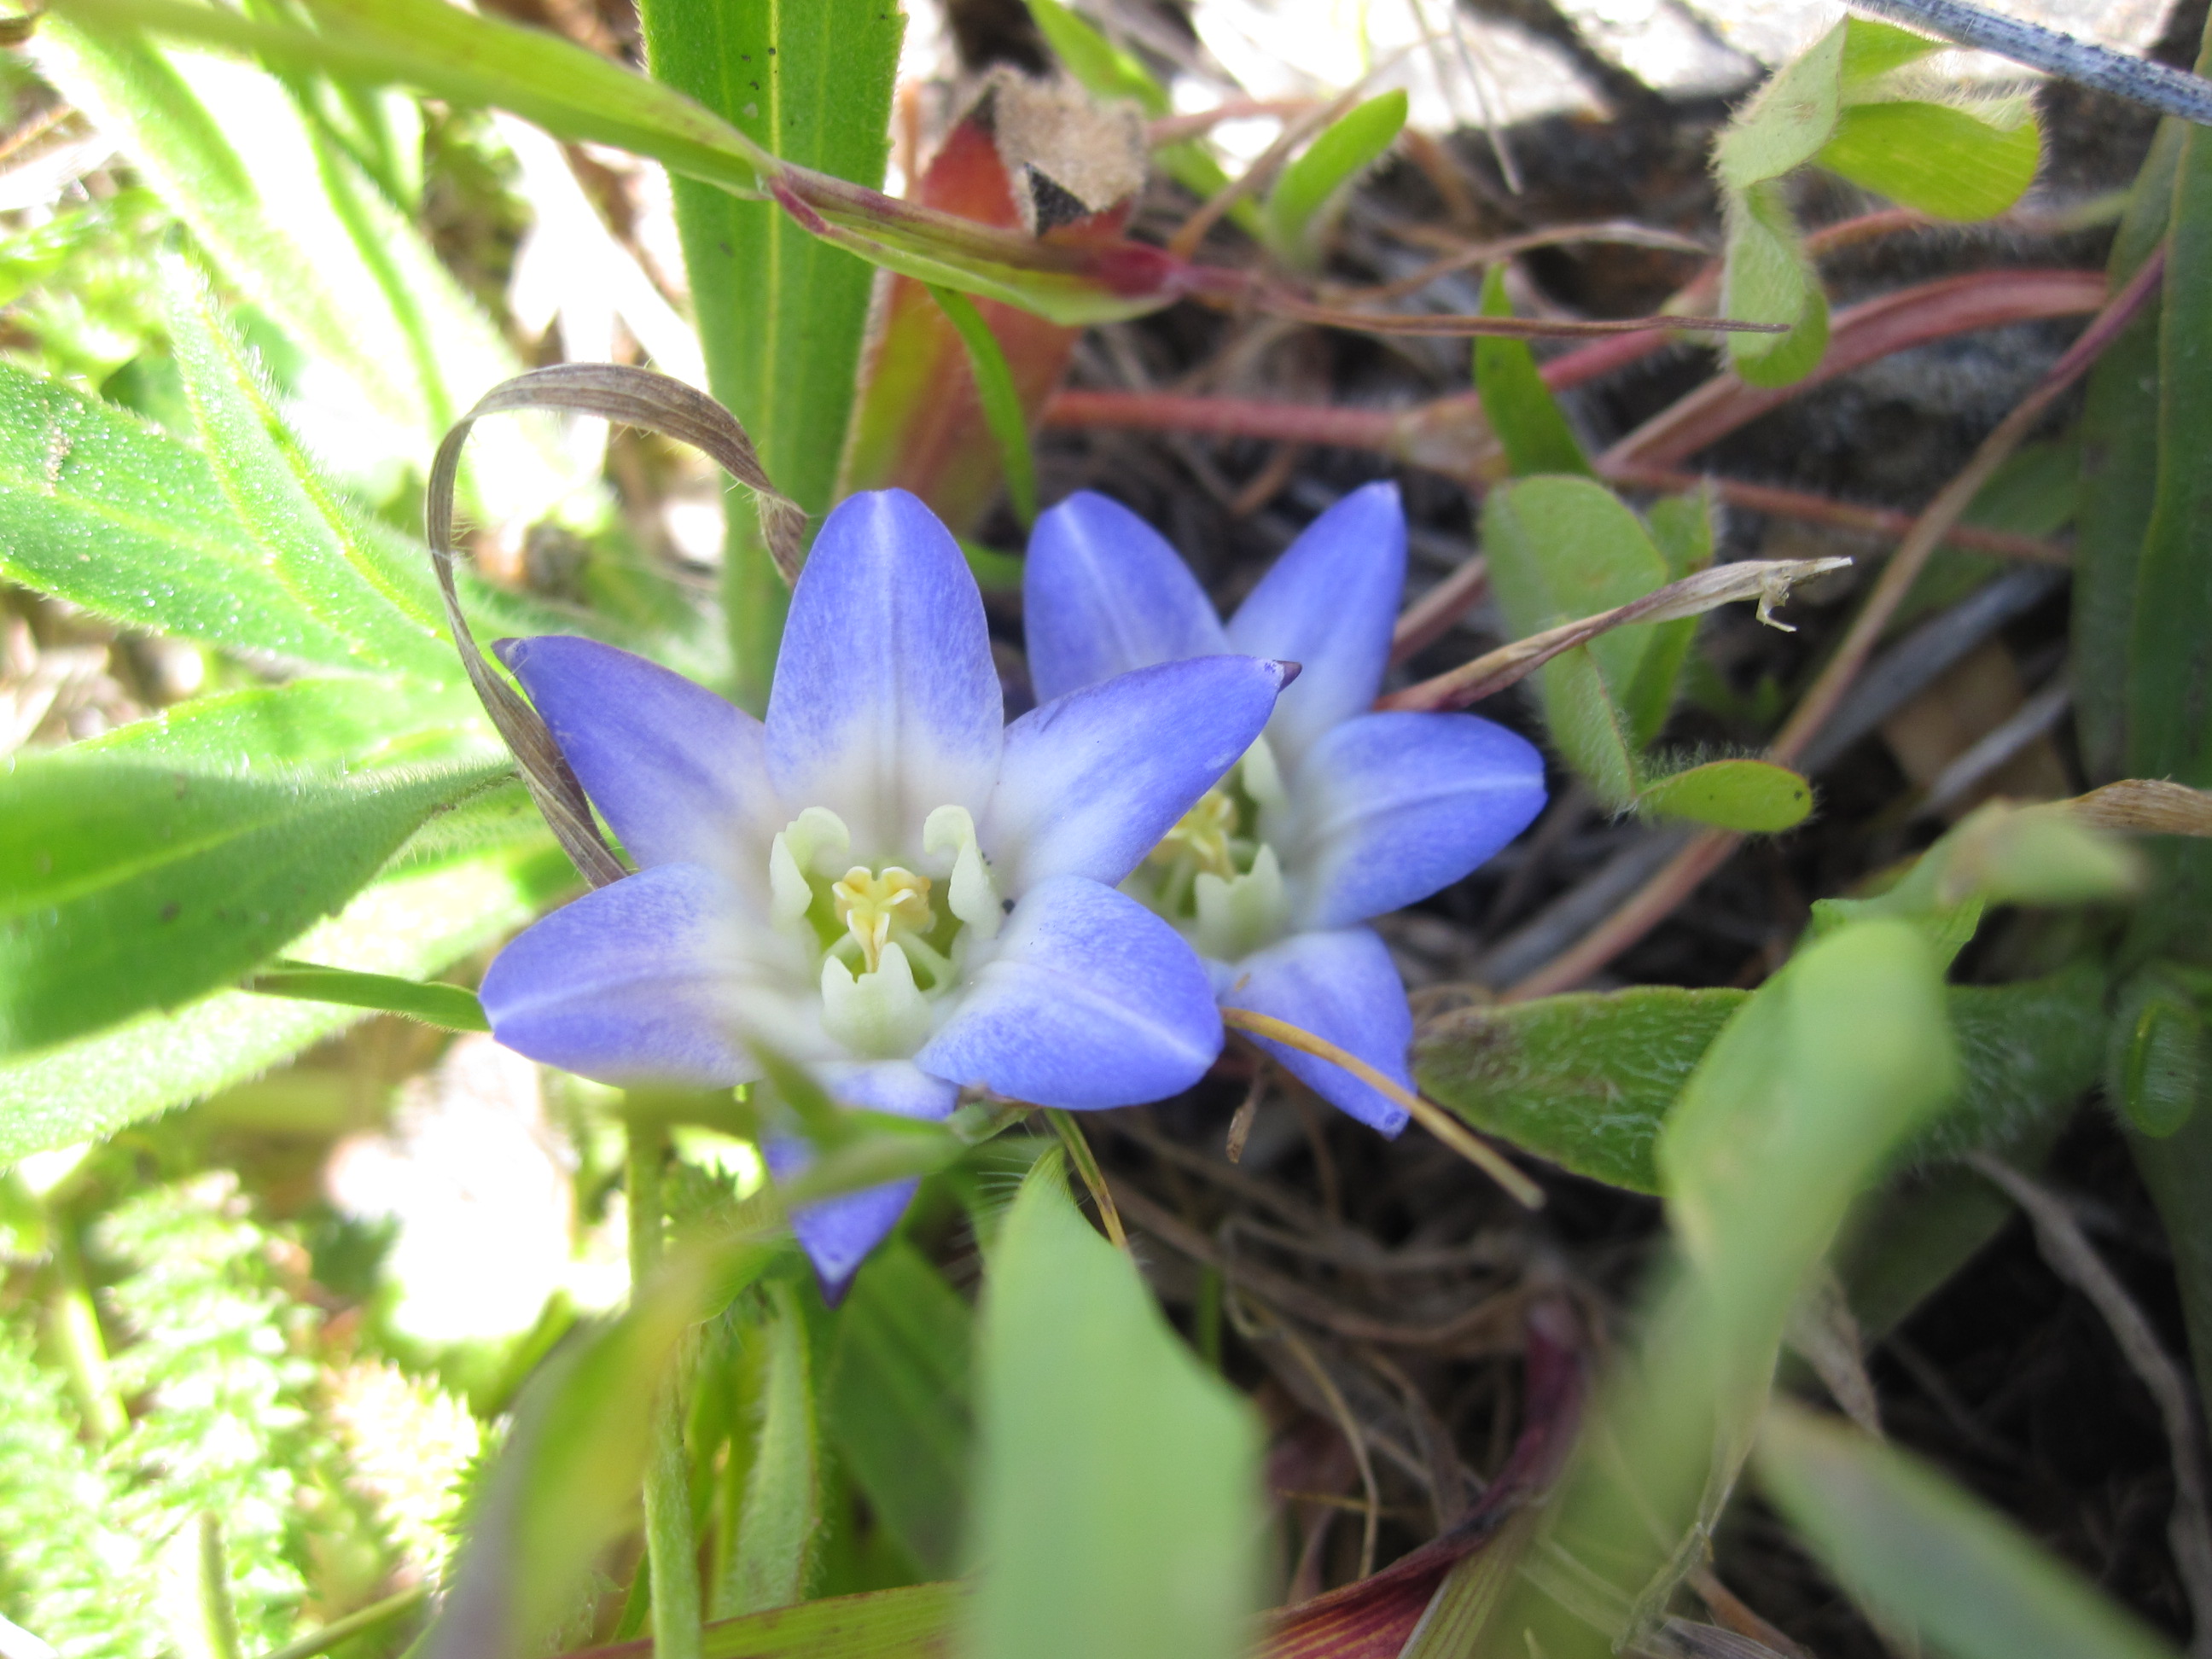 lose up of the blue-purple flowers of dwarf brodiaea